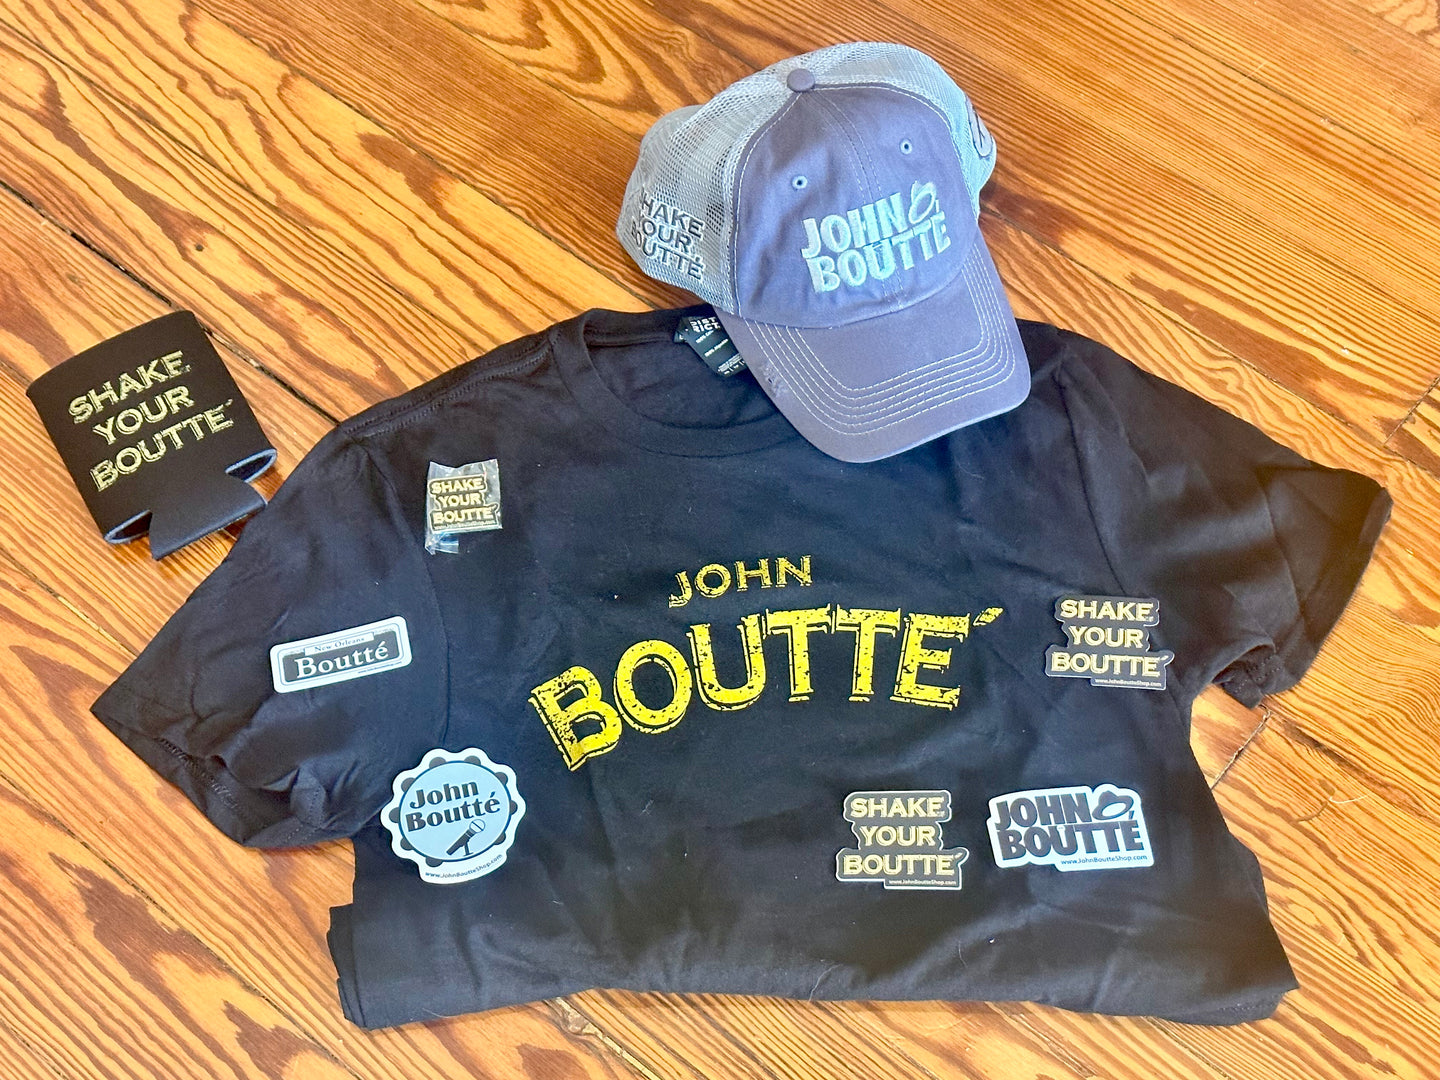 FULL Boutté MERCH kit - GET THE WHOLE COLLECTION for 30% off!!!